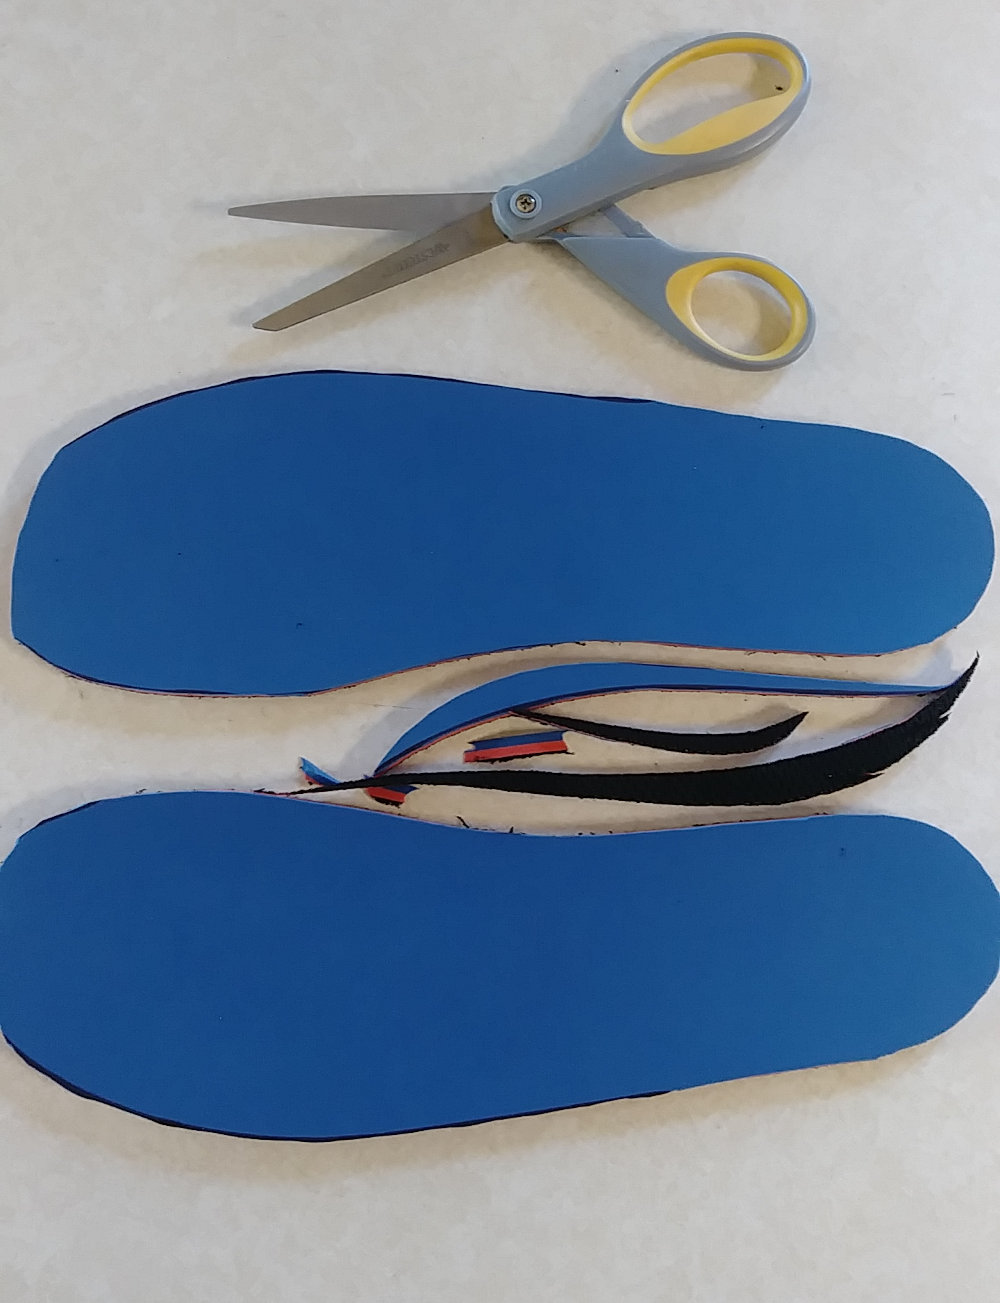 NorthSole cut to size insole